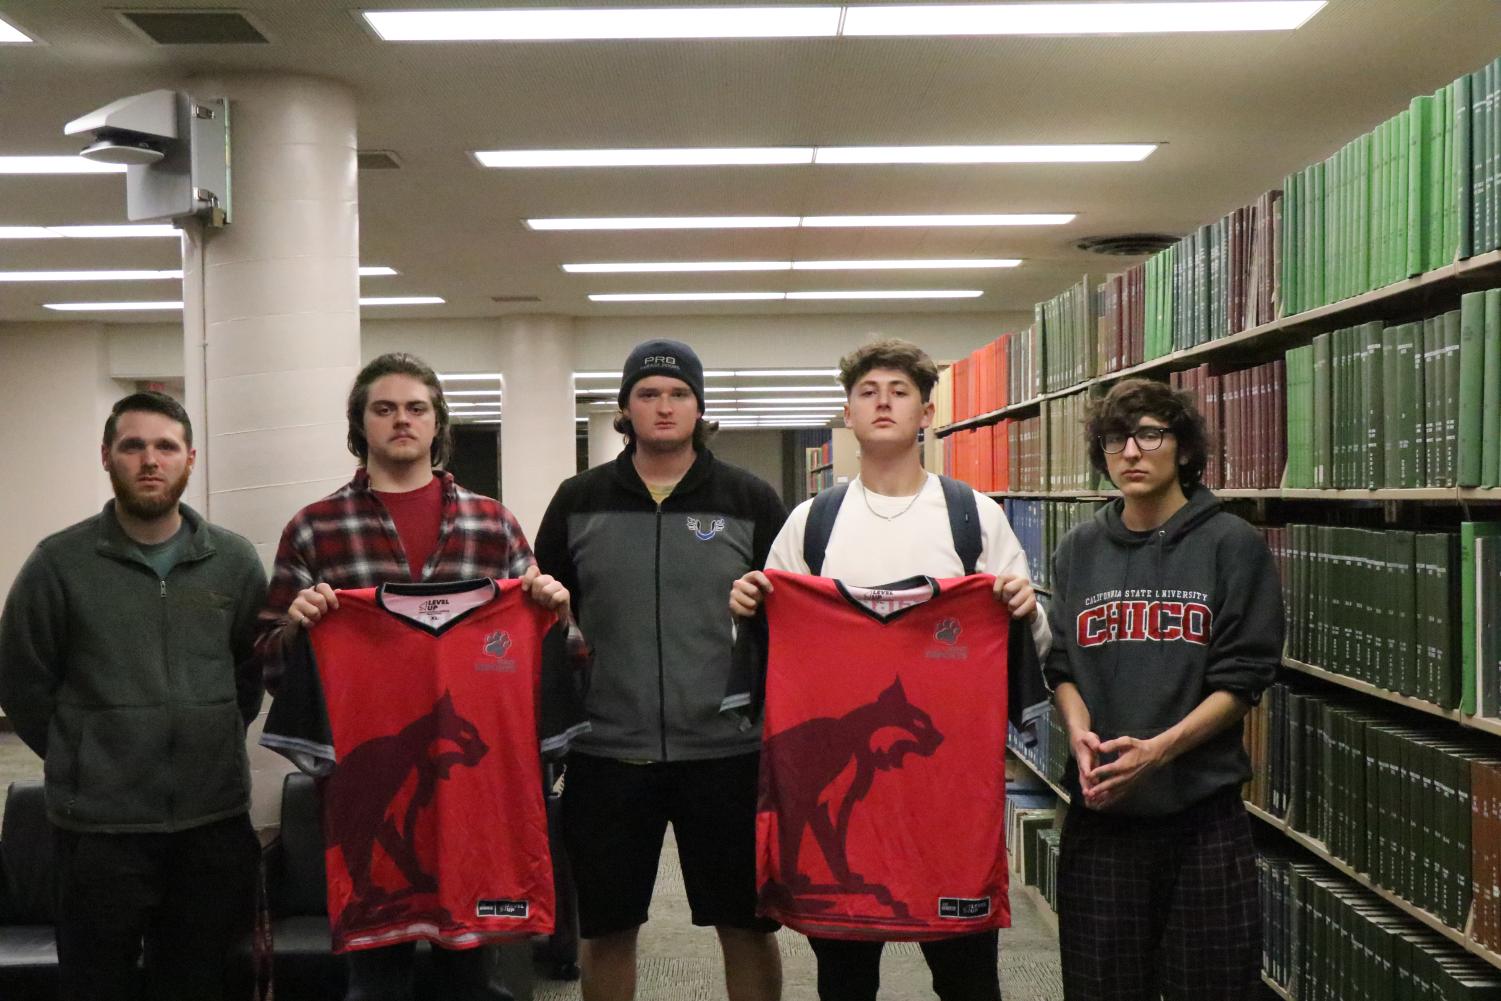 Wildcat esports team members stand with jerseys. Photographed by Wyatt Alpert March 22.